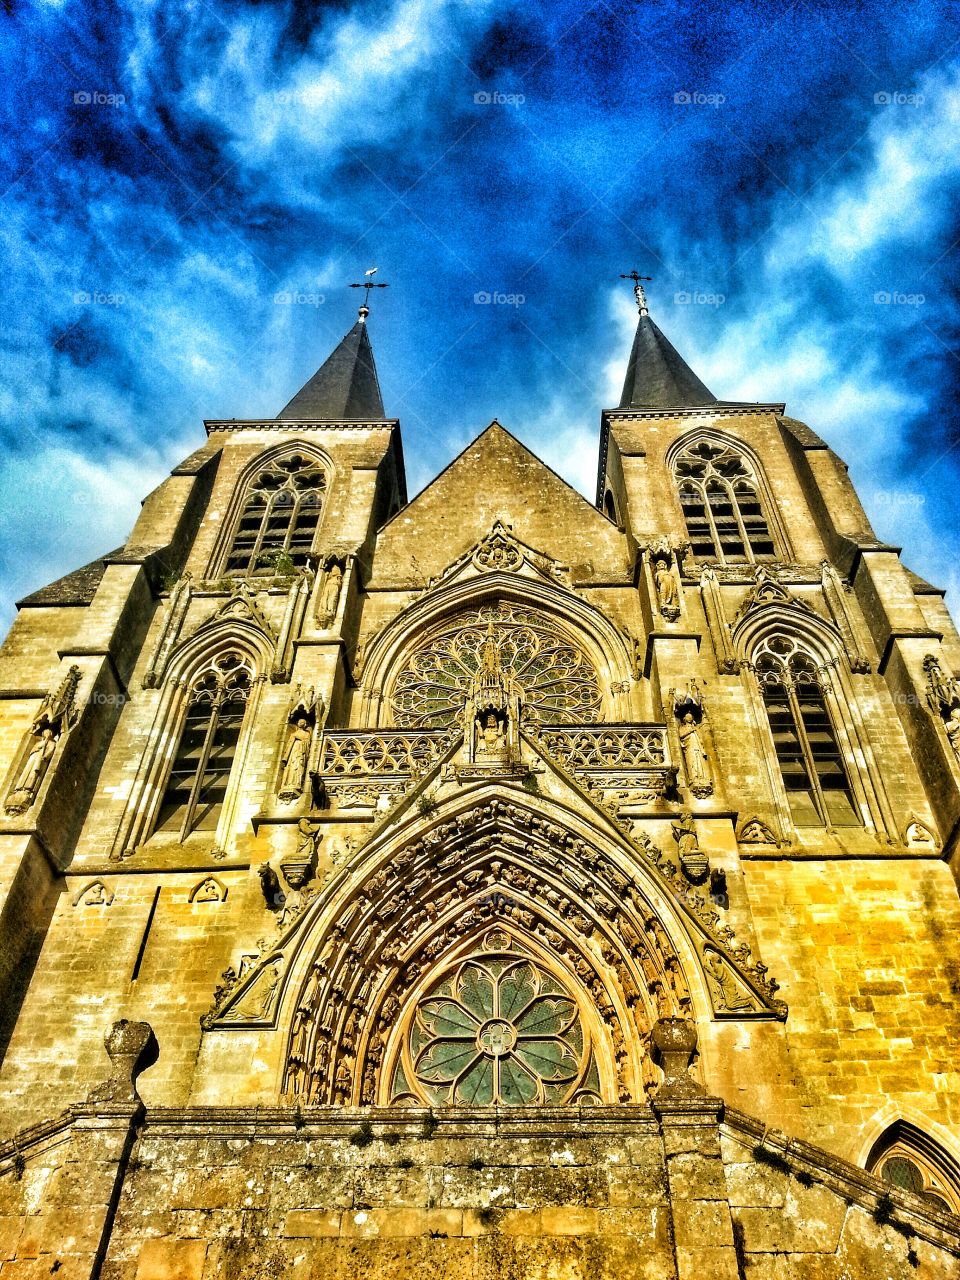 Cathedral made of yellow stone in the Gaume region, southern Belgium